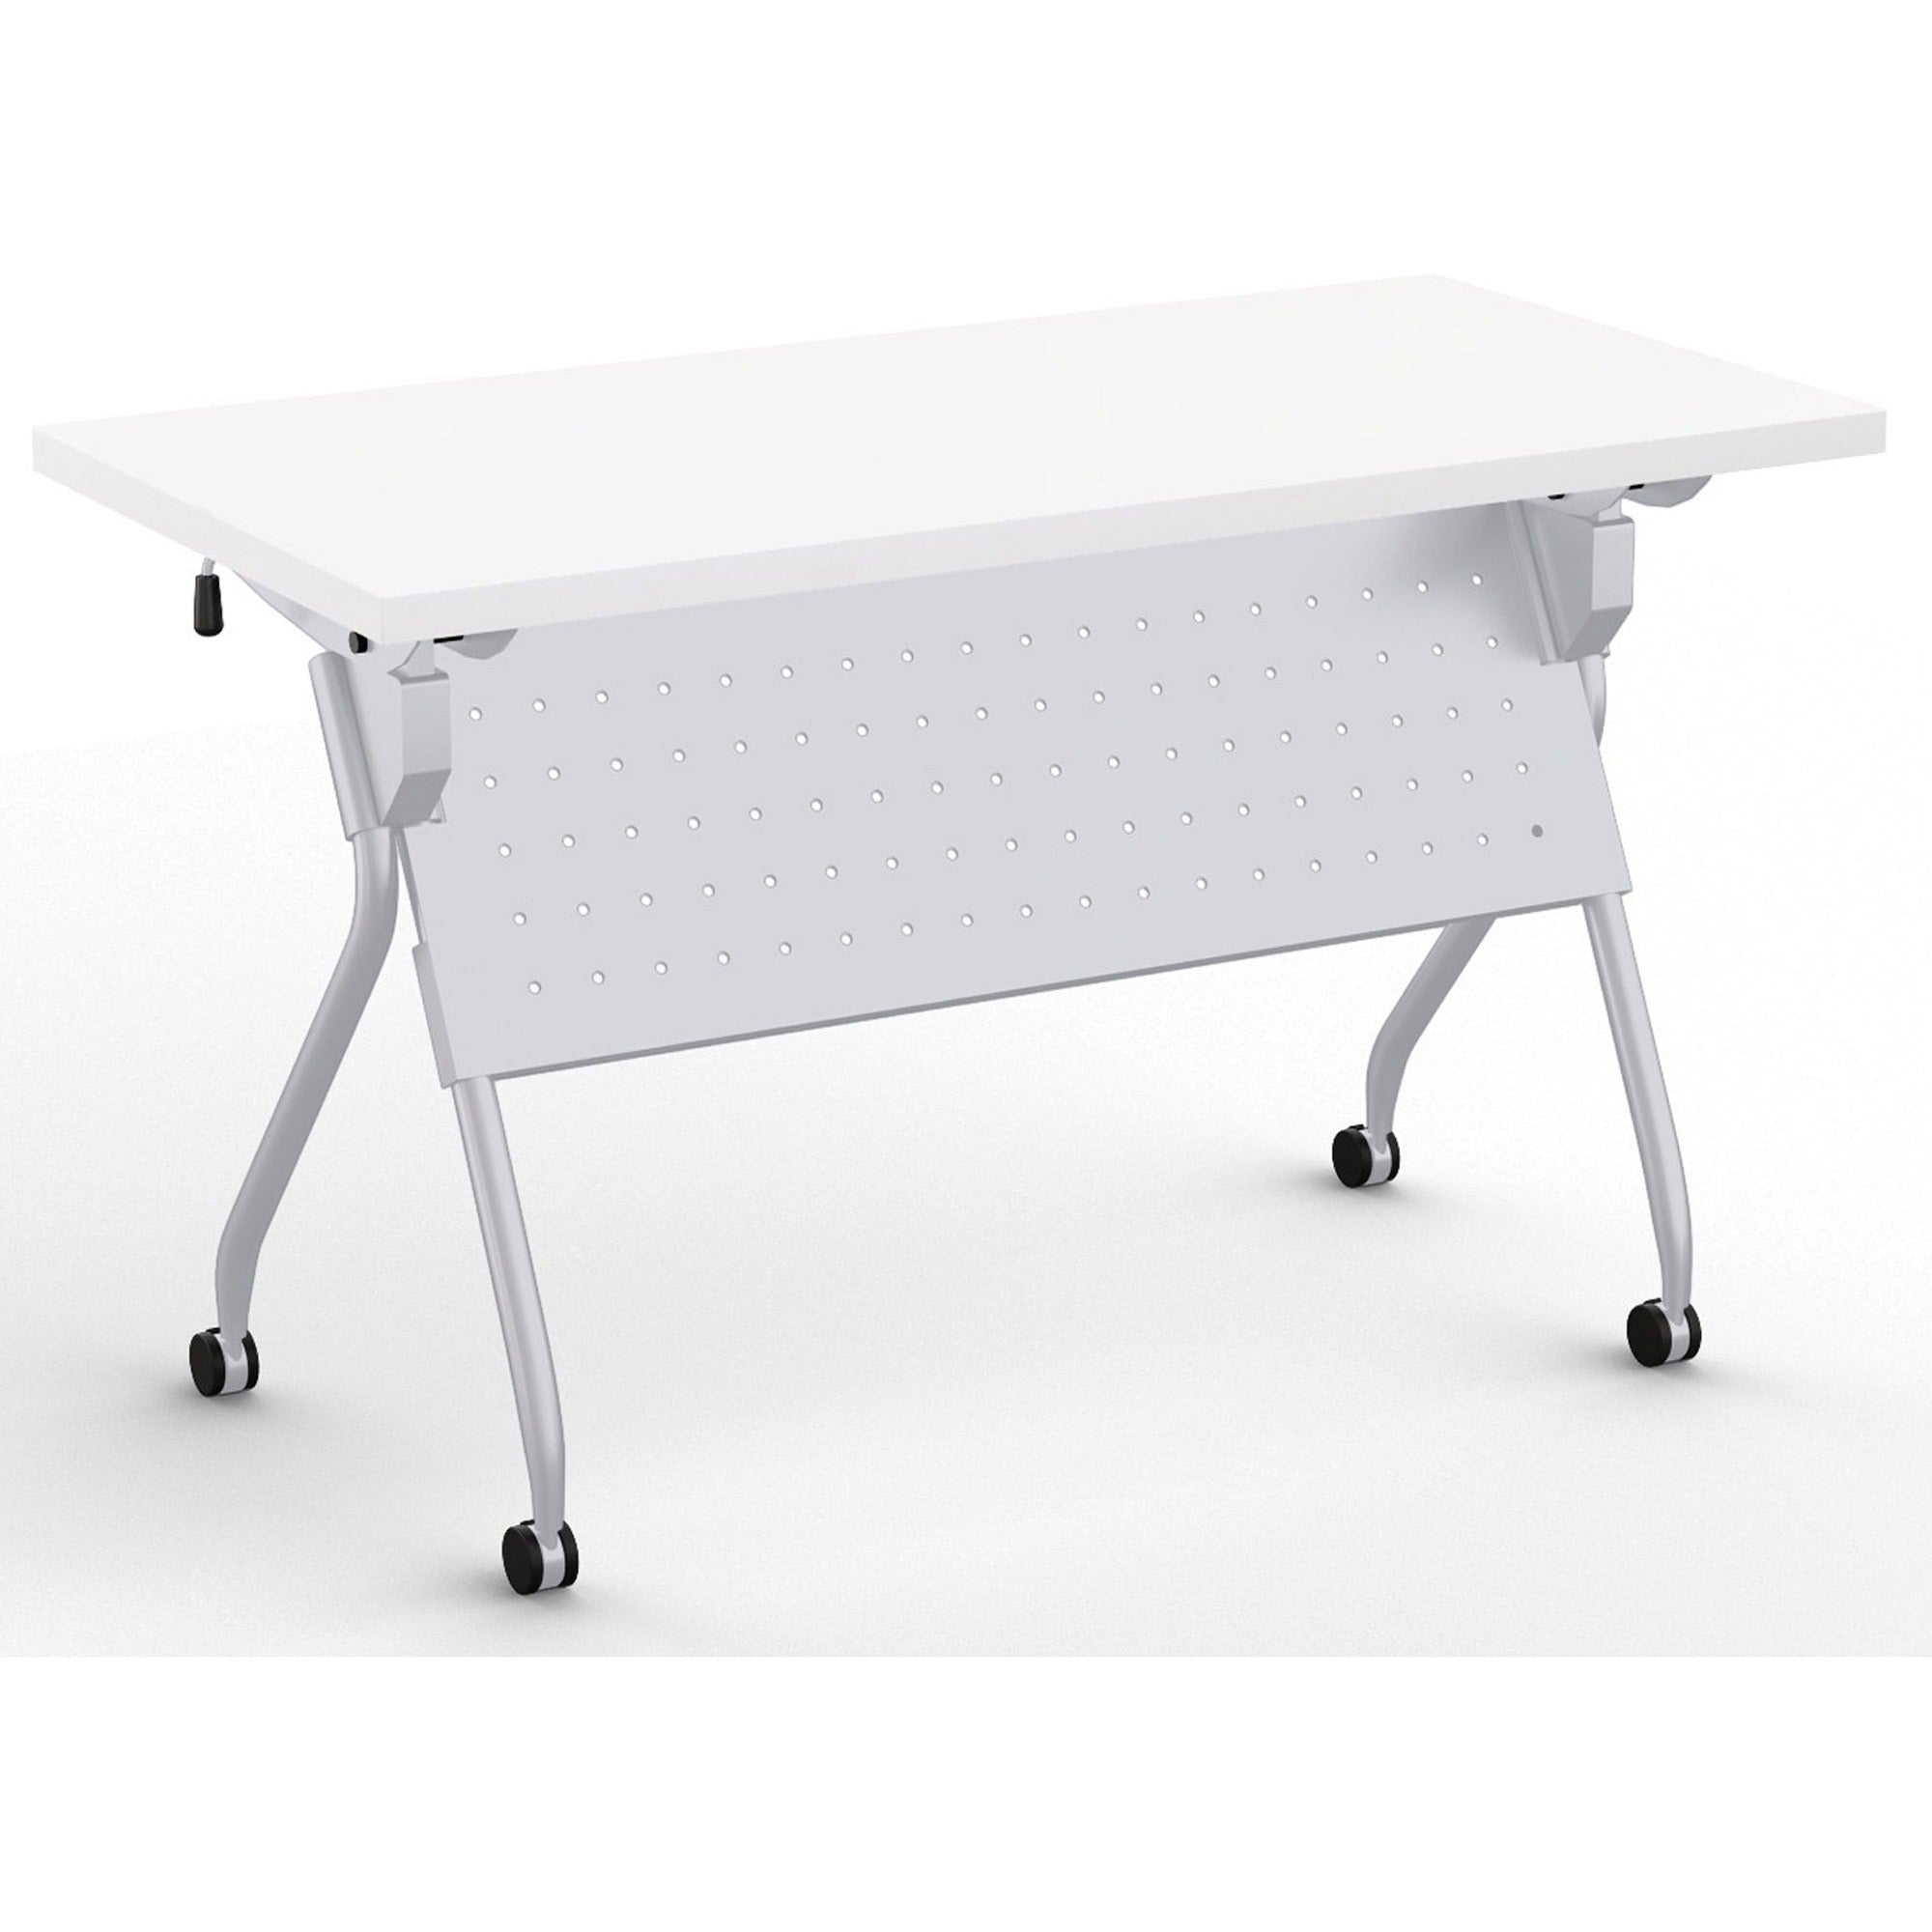 special-t-transform-2-flip-&-nest-table-for-table-topwhite-rectangle-top-silver-cross-beam-base-112-lb-capacity-x-48-table-top-width-x-24-table-top-depth-x-125-table-top-thickness-30-height-assembly-required-steel-high-pressure-l_scttrnf22448swh - 1